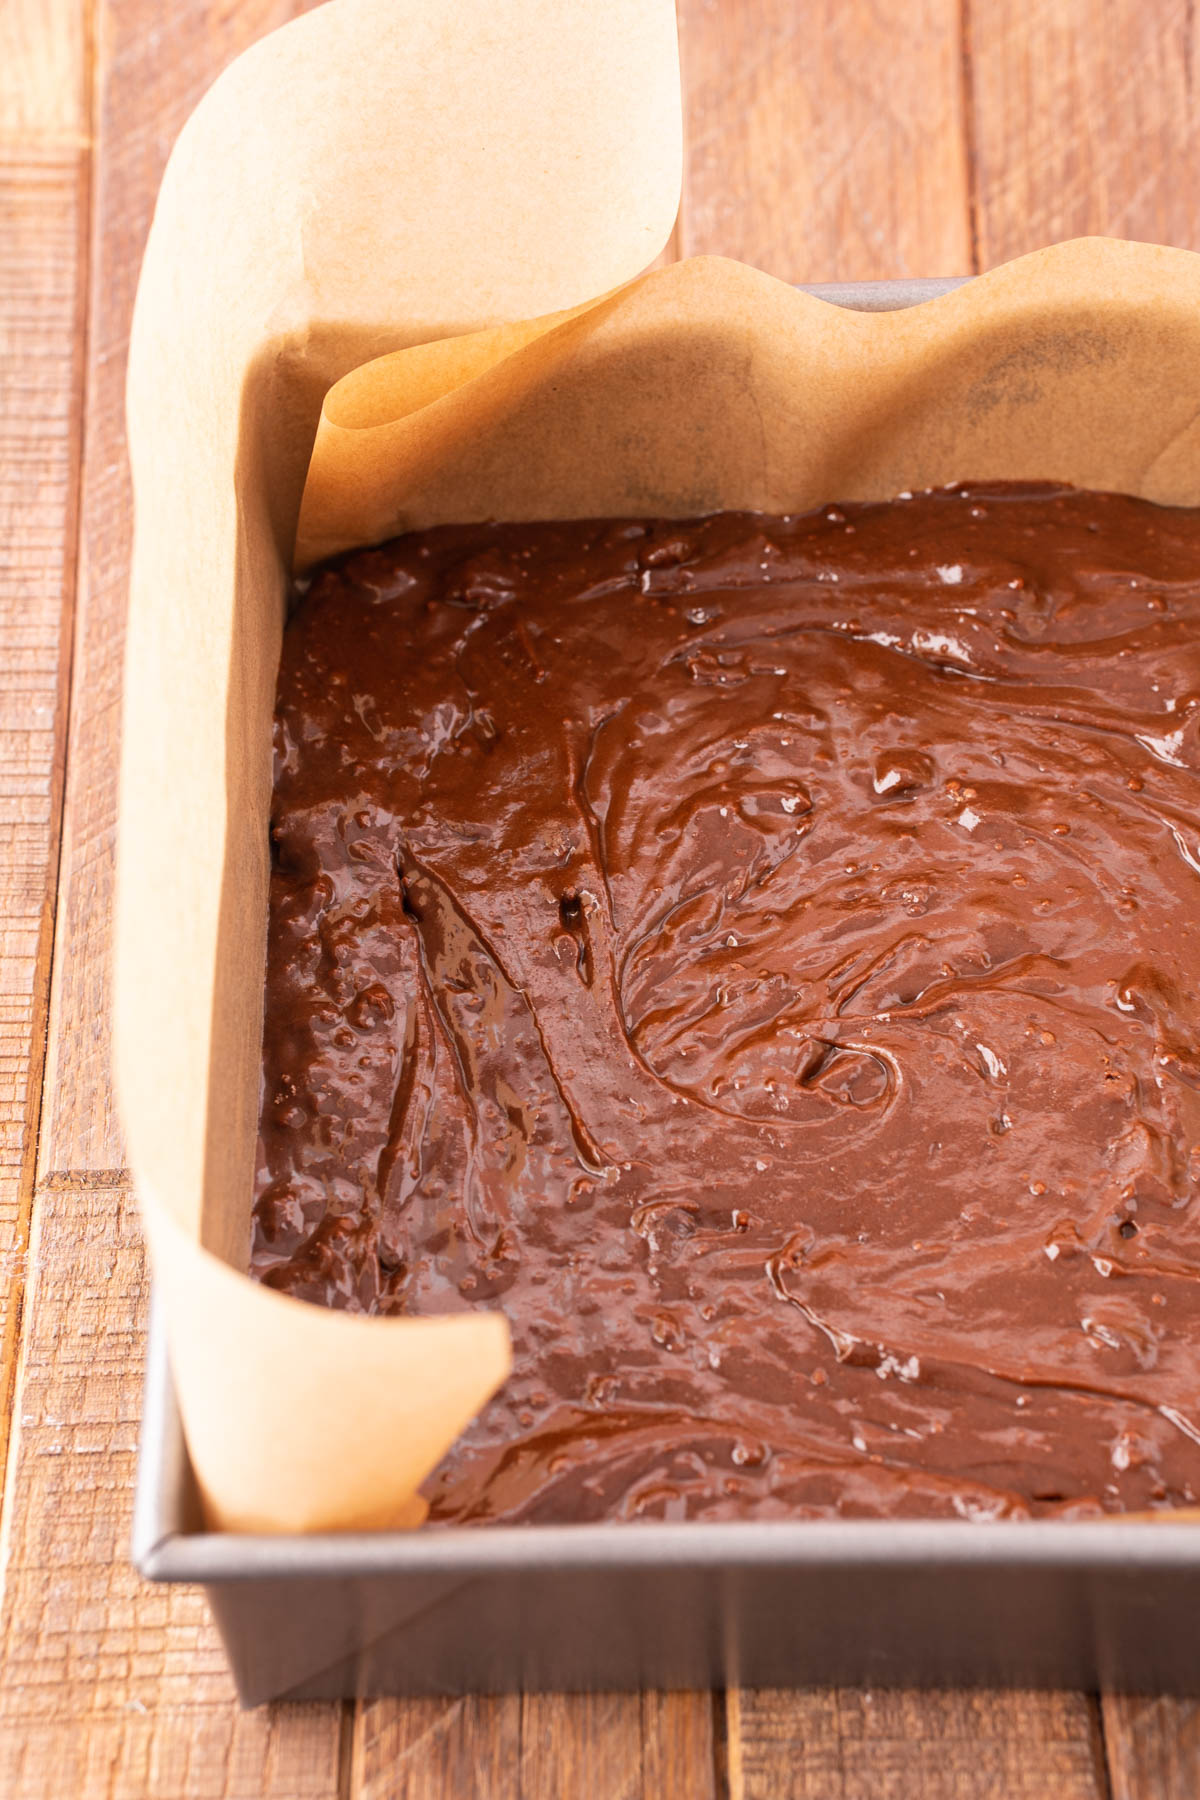 Brownie batter in a baking pan with parchment paper ready to bake.